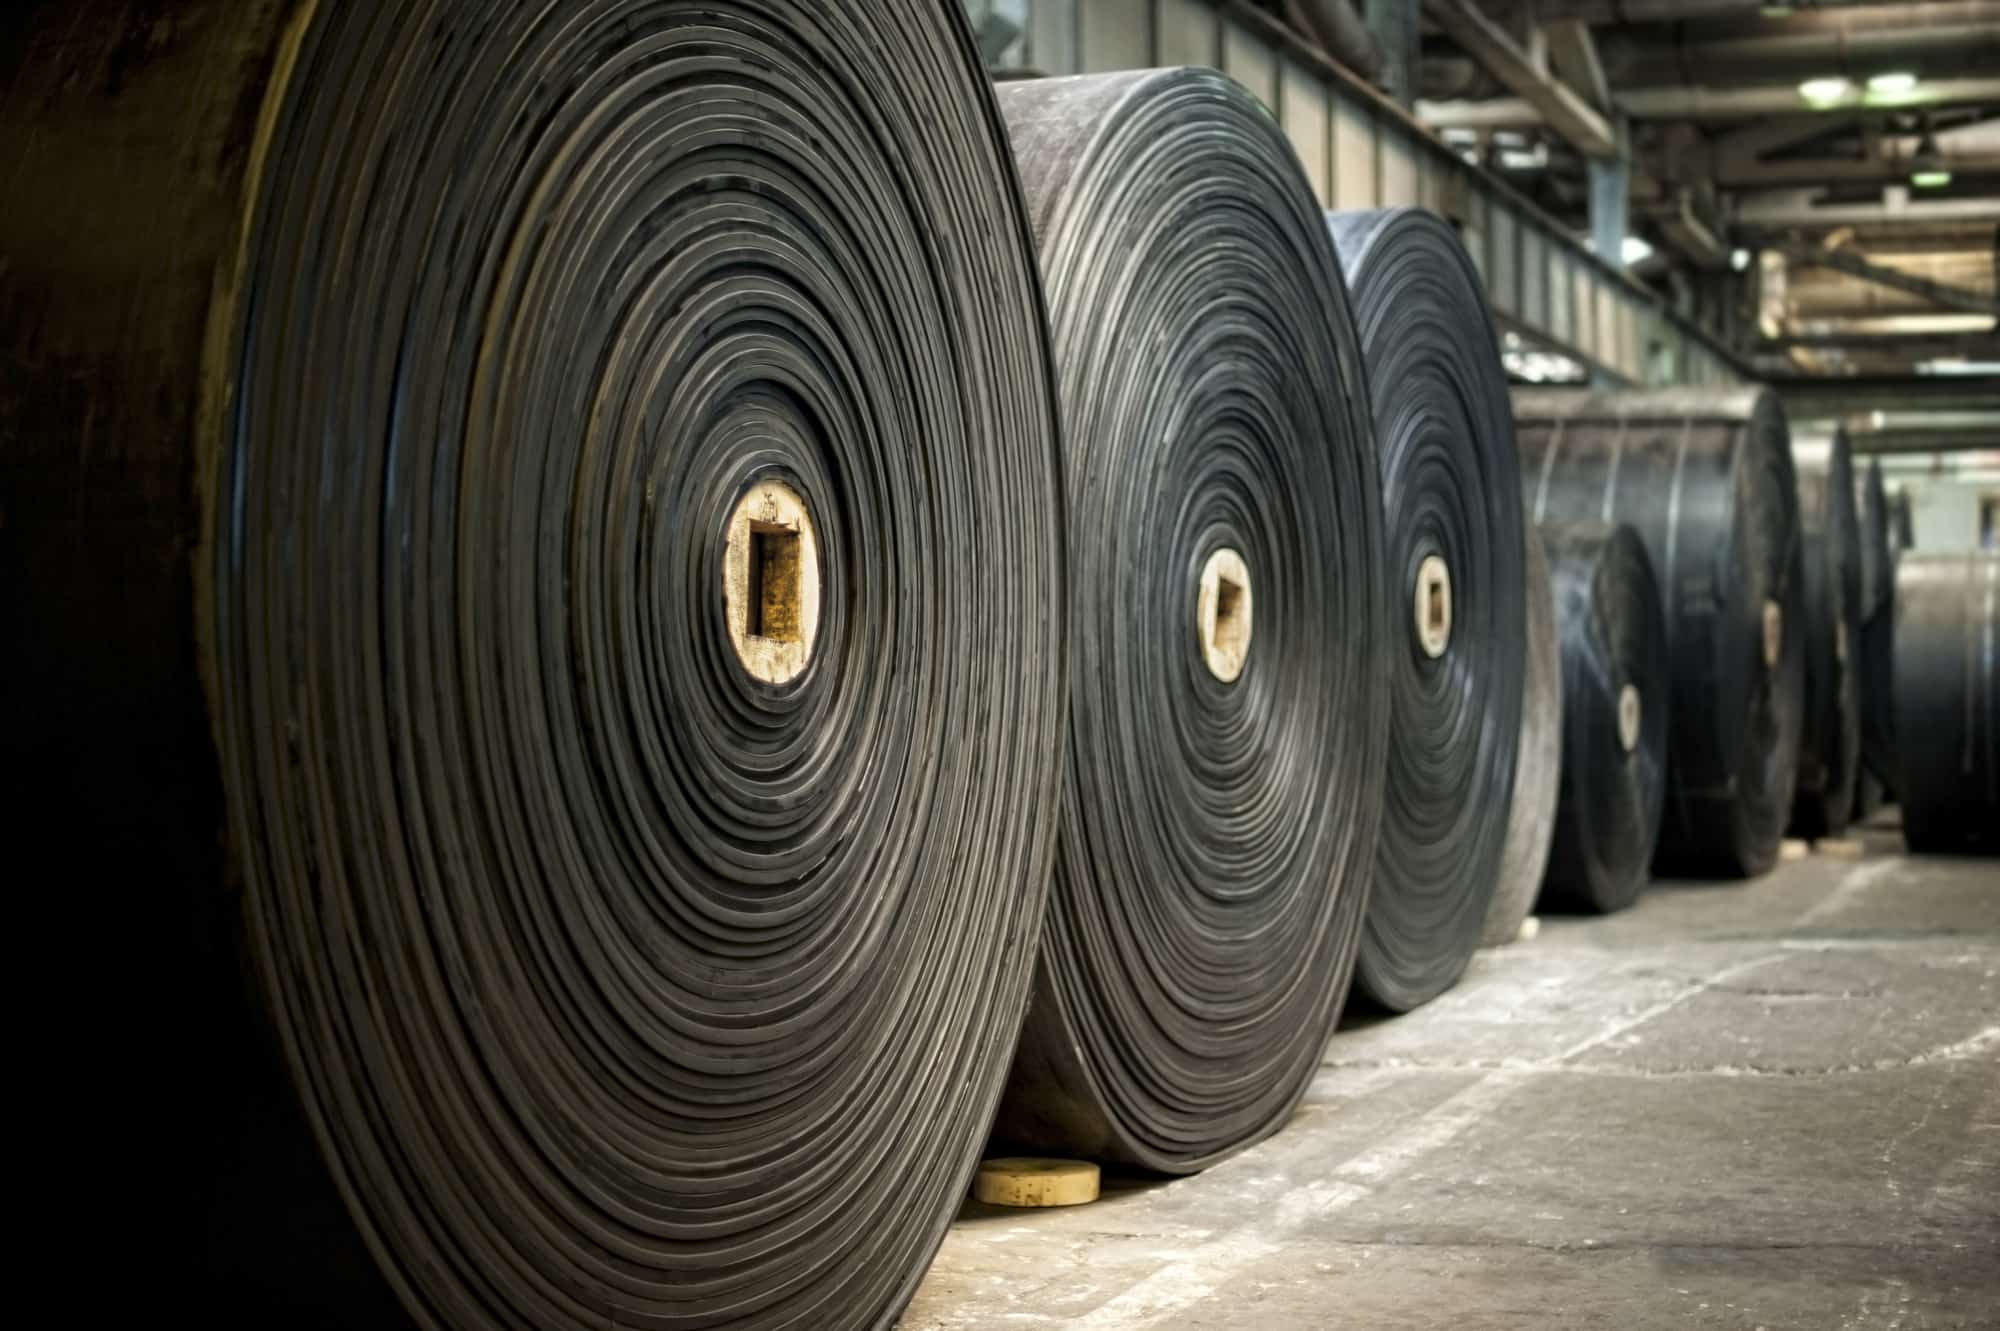 rubber rolls in a warehouse